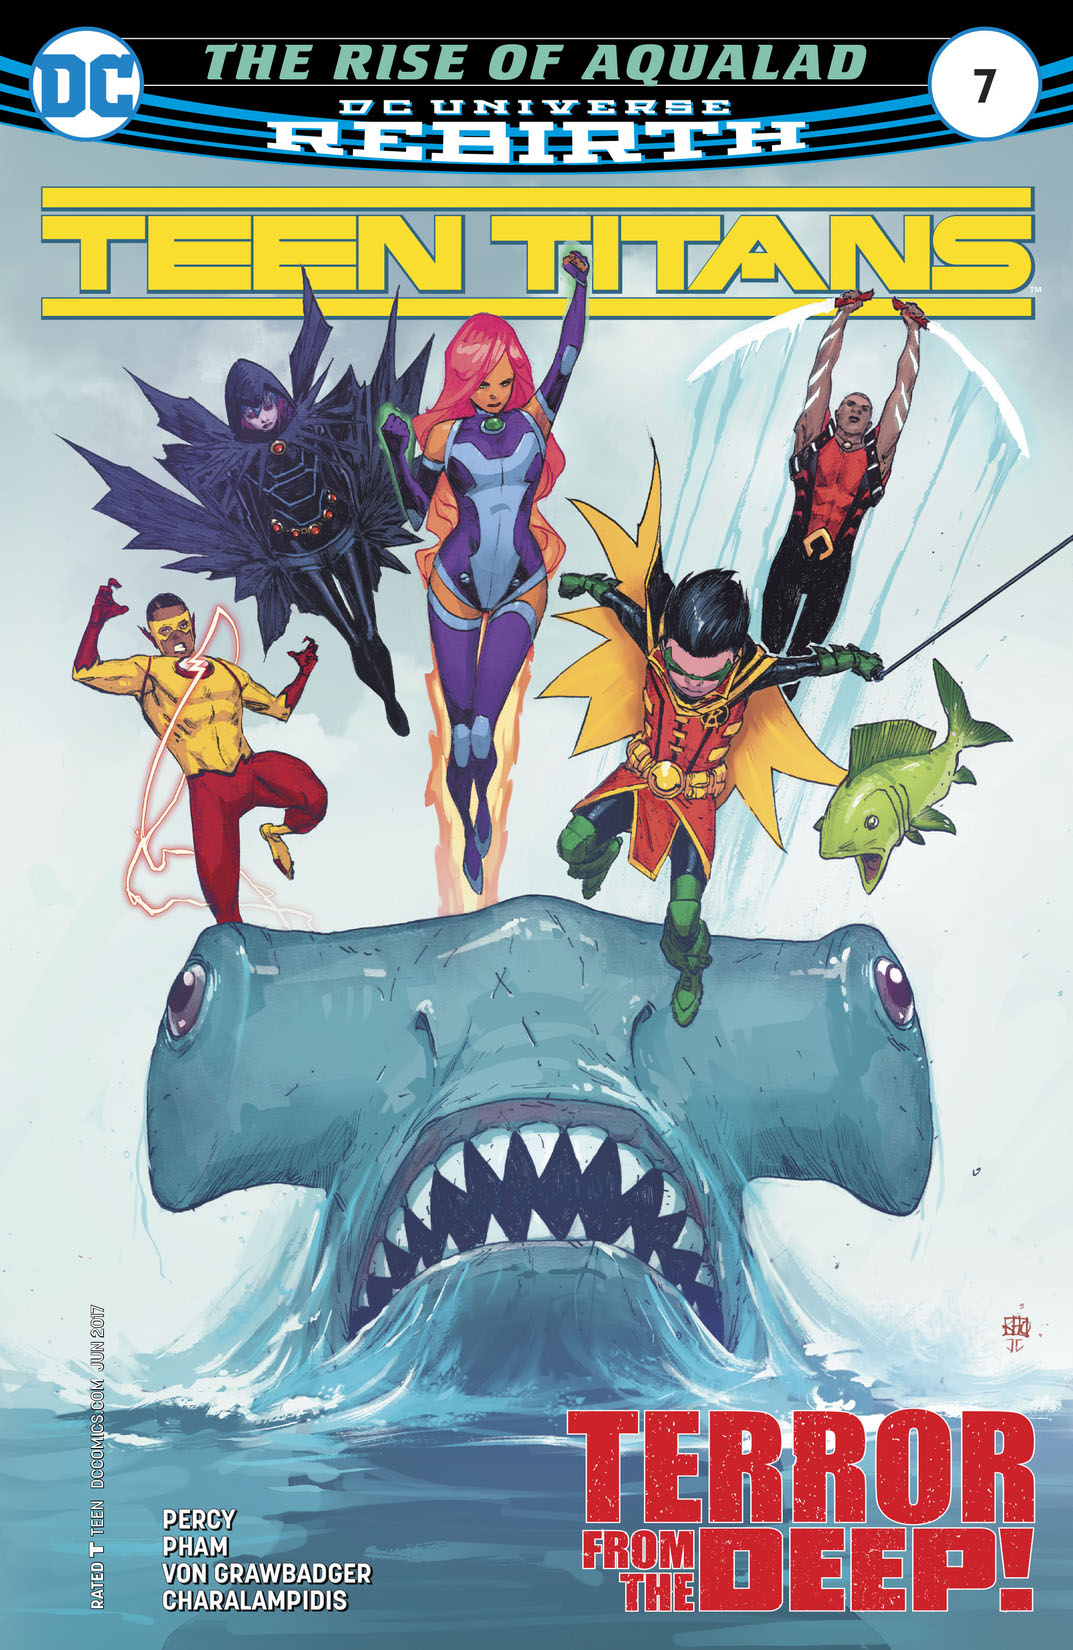 Teen Titans (2016-) #7 preview images